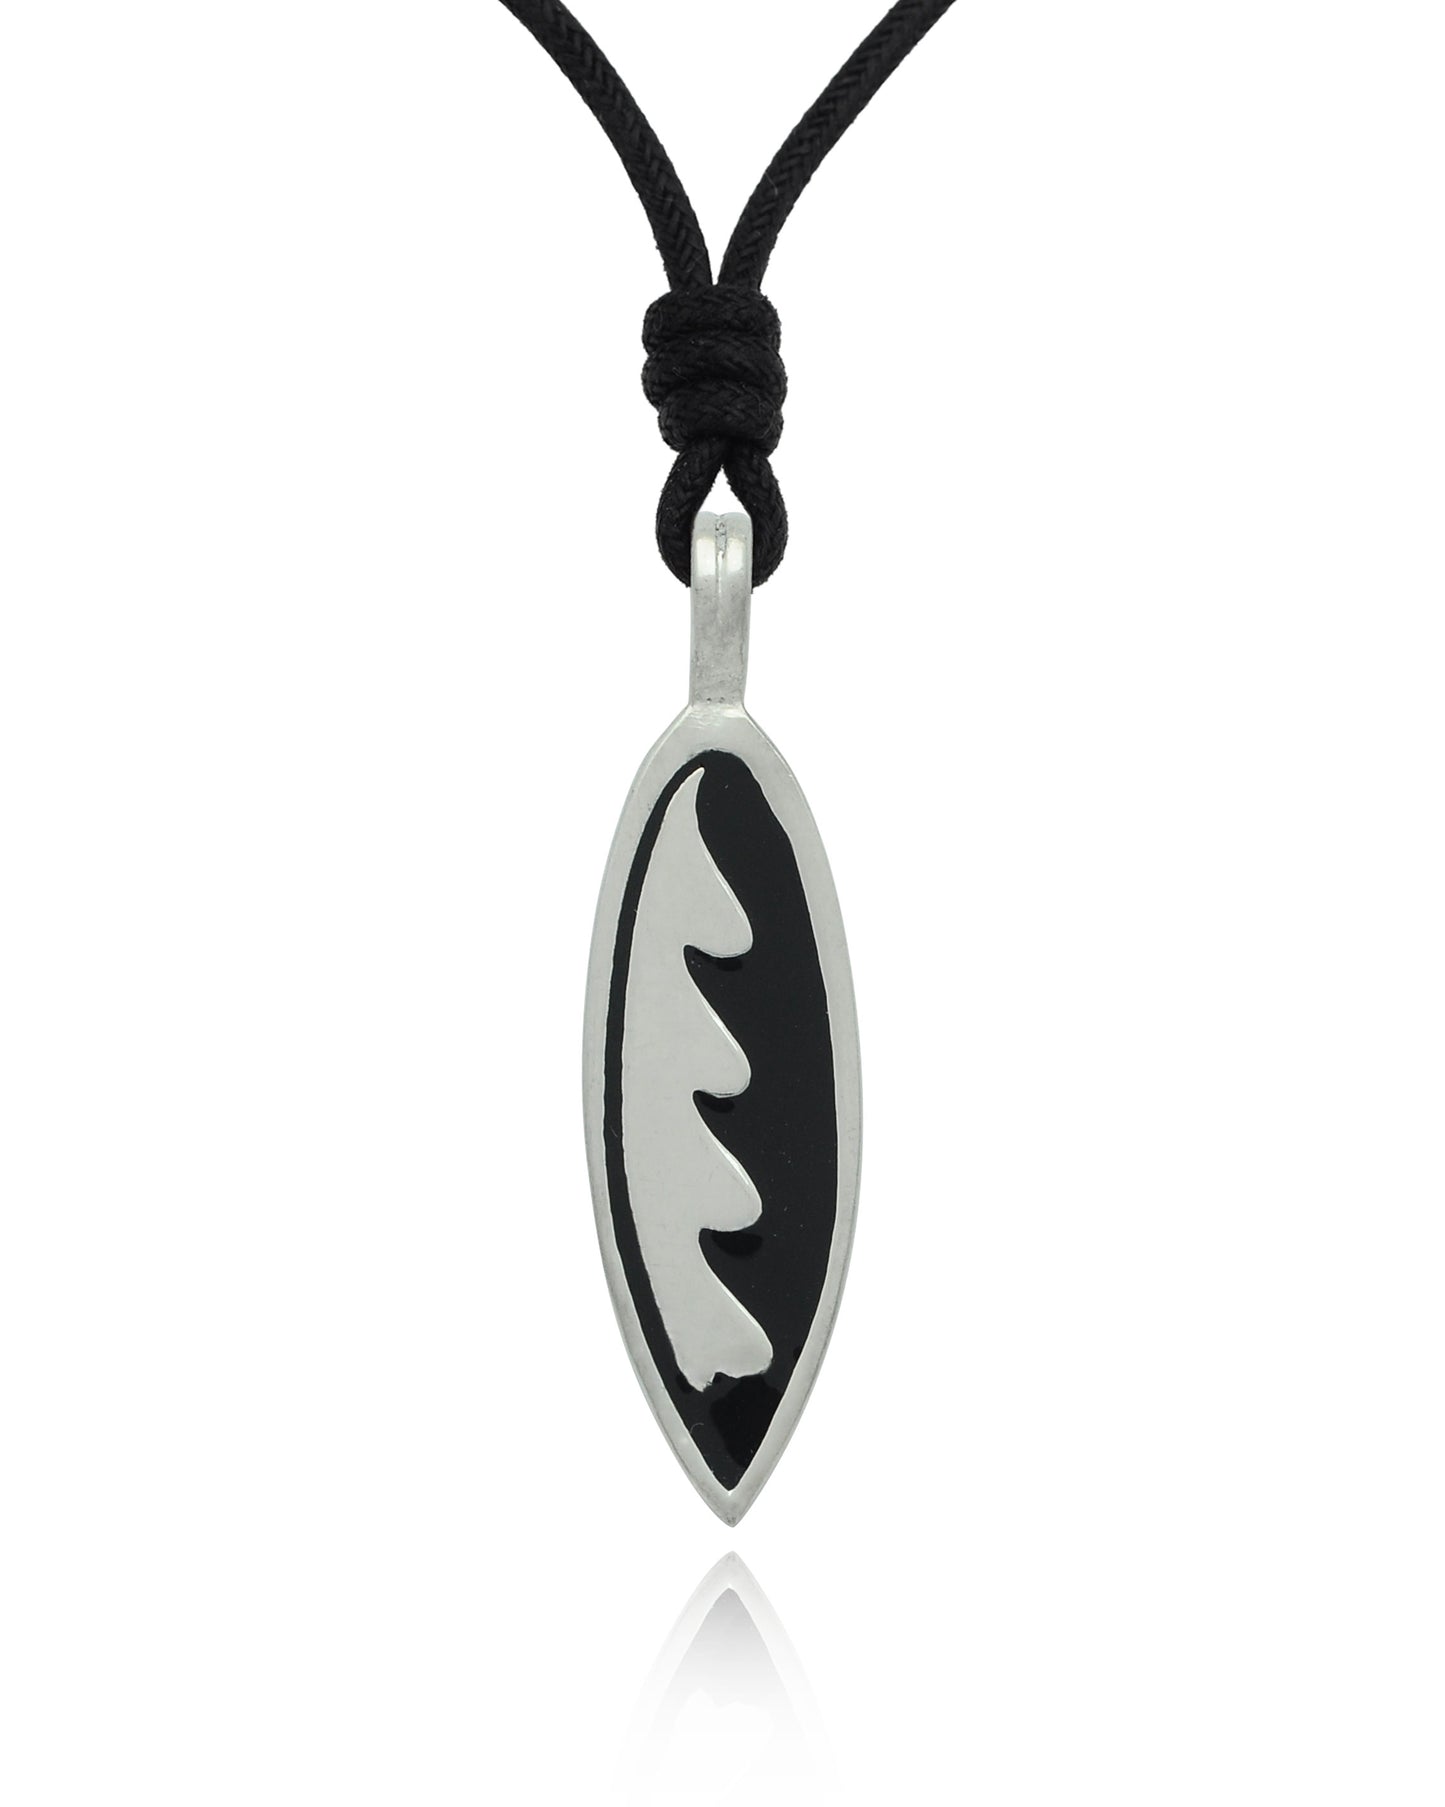 Surfboard Silver Pewter Charm Necklace Pendant Jewelry